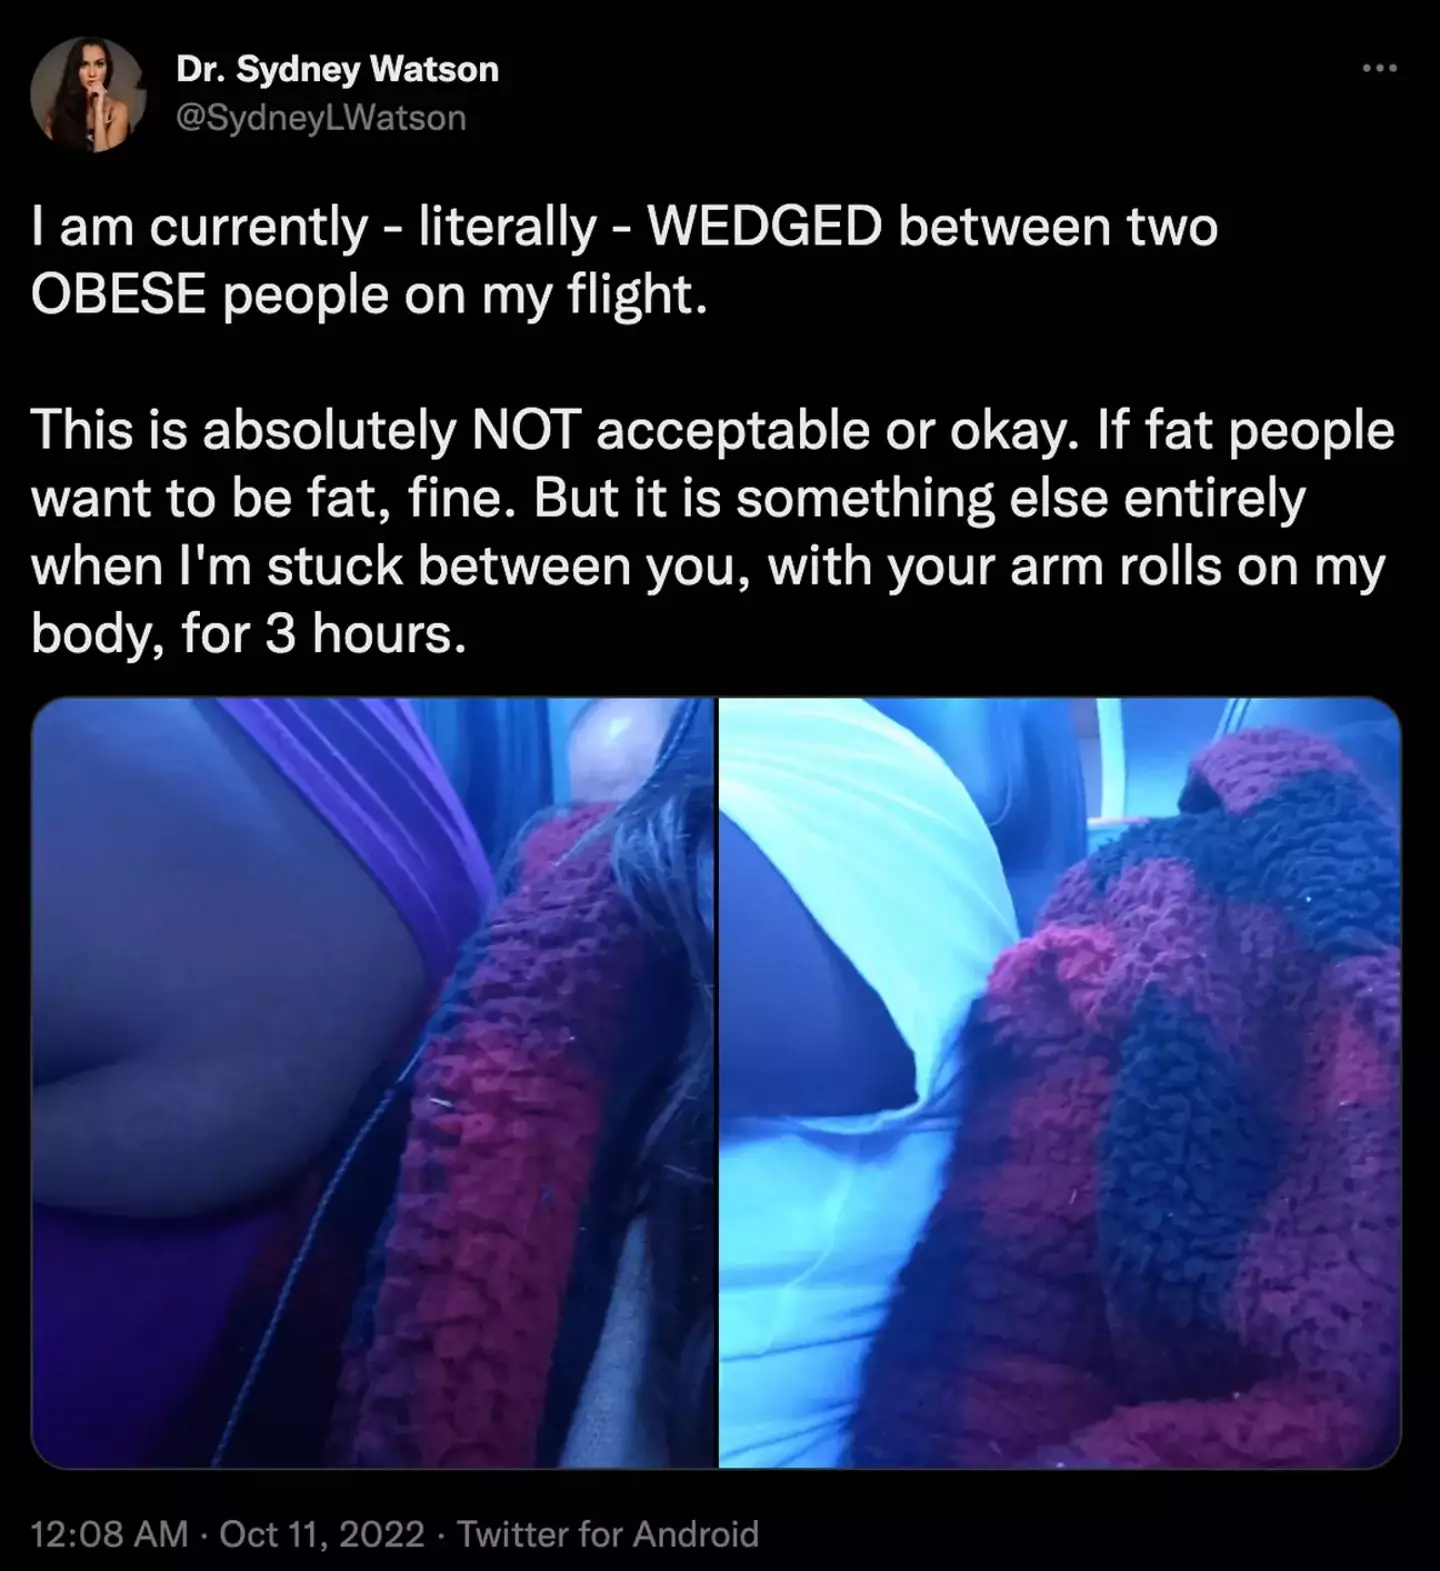 Dr Sydney Watson took to X to complain about being 'wedged in between two obese people' on her American Airlines flight.